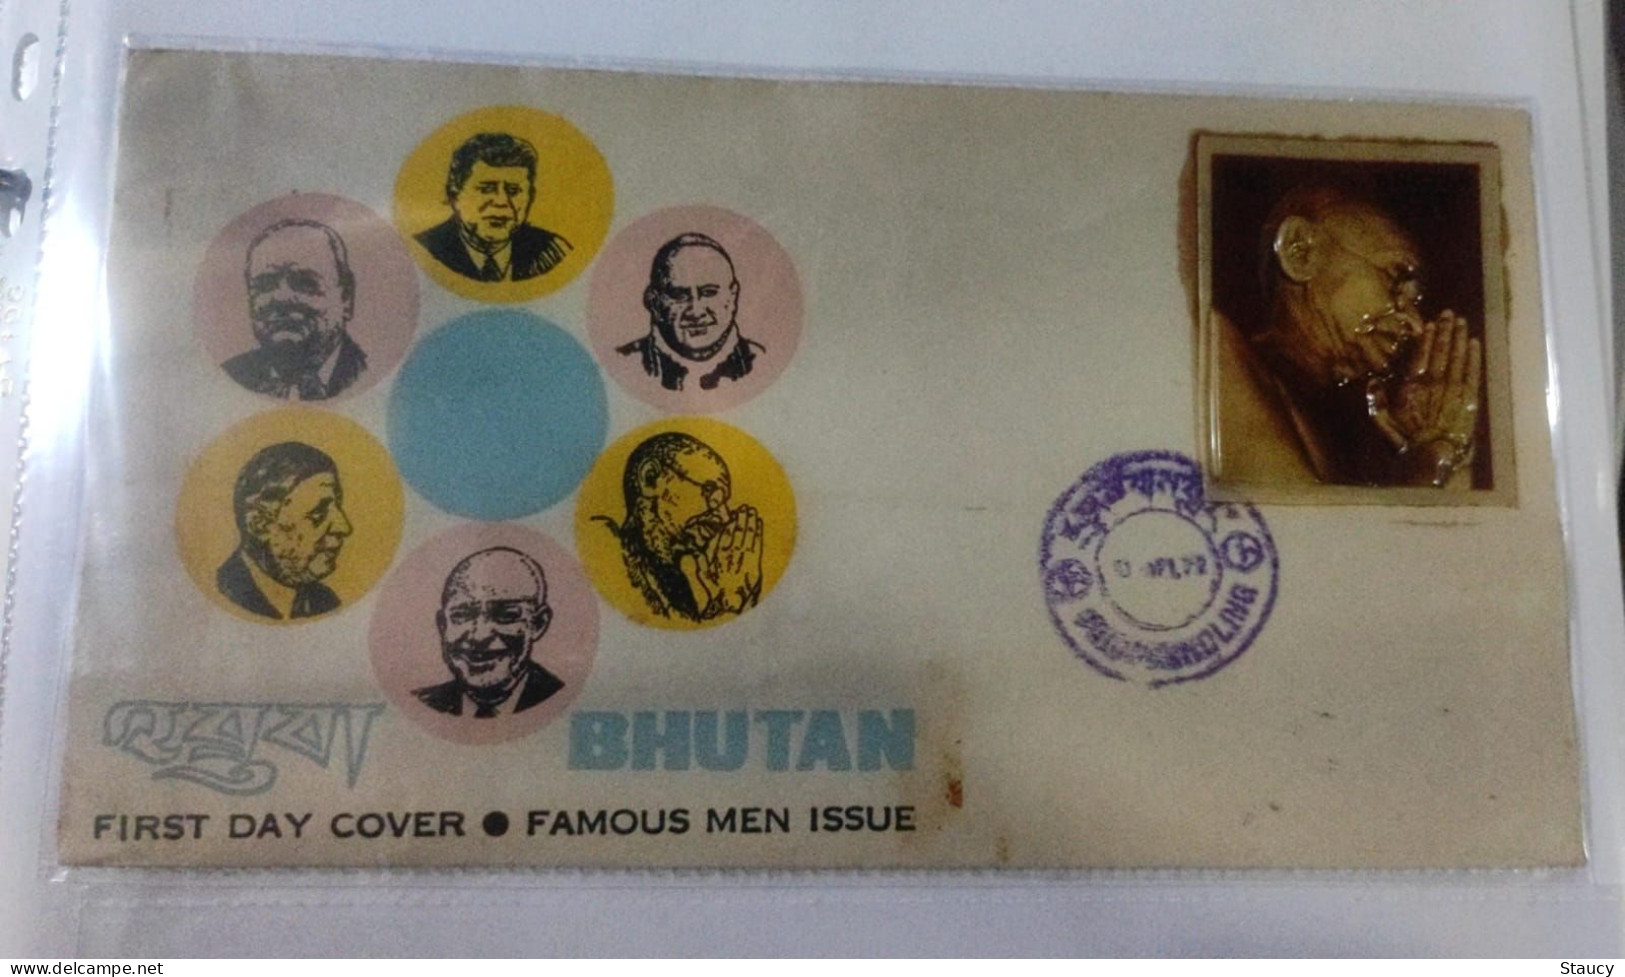 BHUTAN 1972 FAMOUS PEOPLE/PERSONS/PERSONALITIES MAHATMA GANDHI 3-D Heat Moulded Plastic Stamp First Day Cover FDC - Mahatma Gandhi